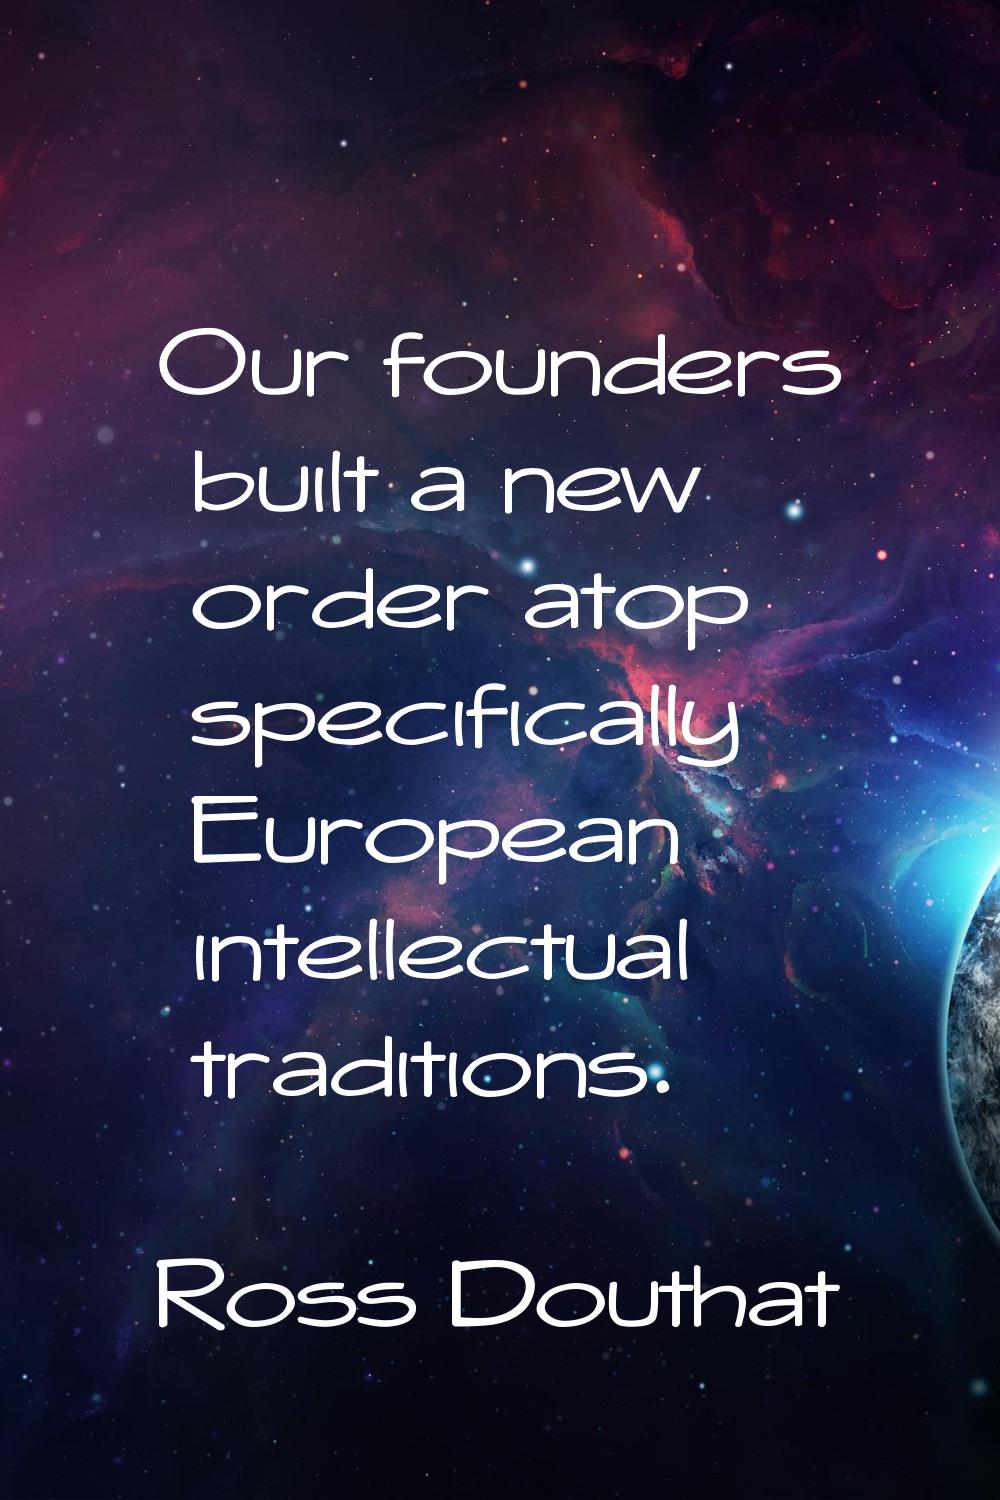 Our founders built a new order atop specifically European intellectual traditions.